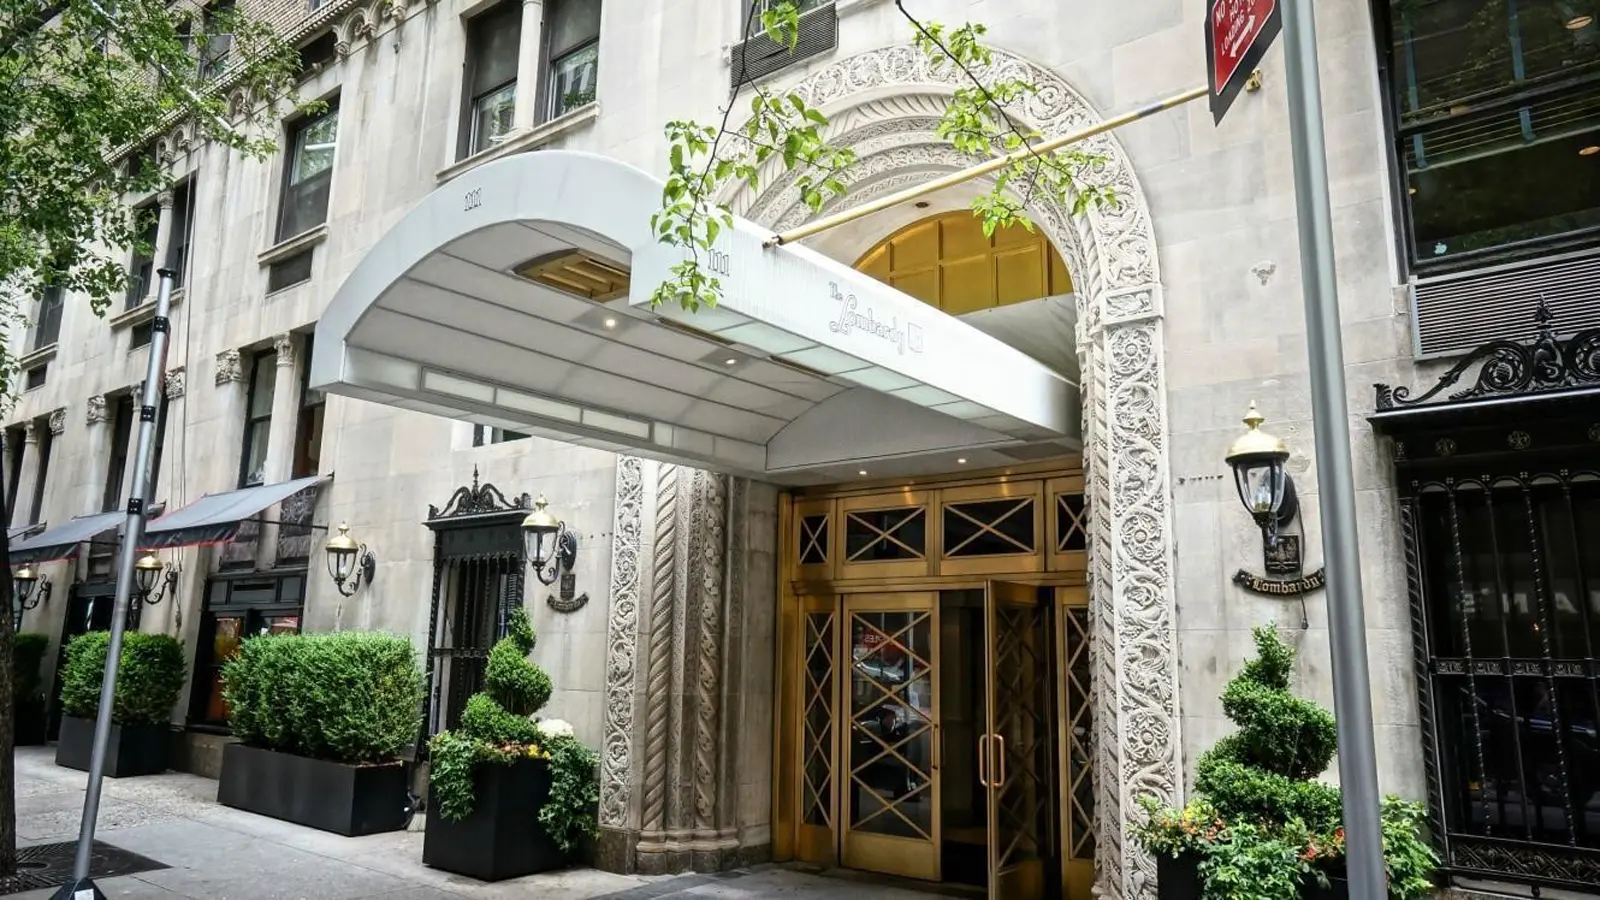 The Lombardy, 111 East 56th Street